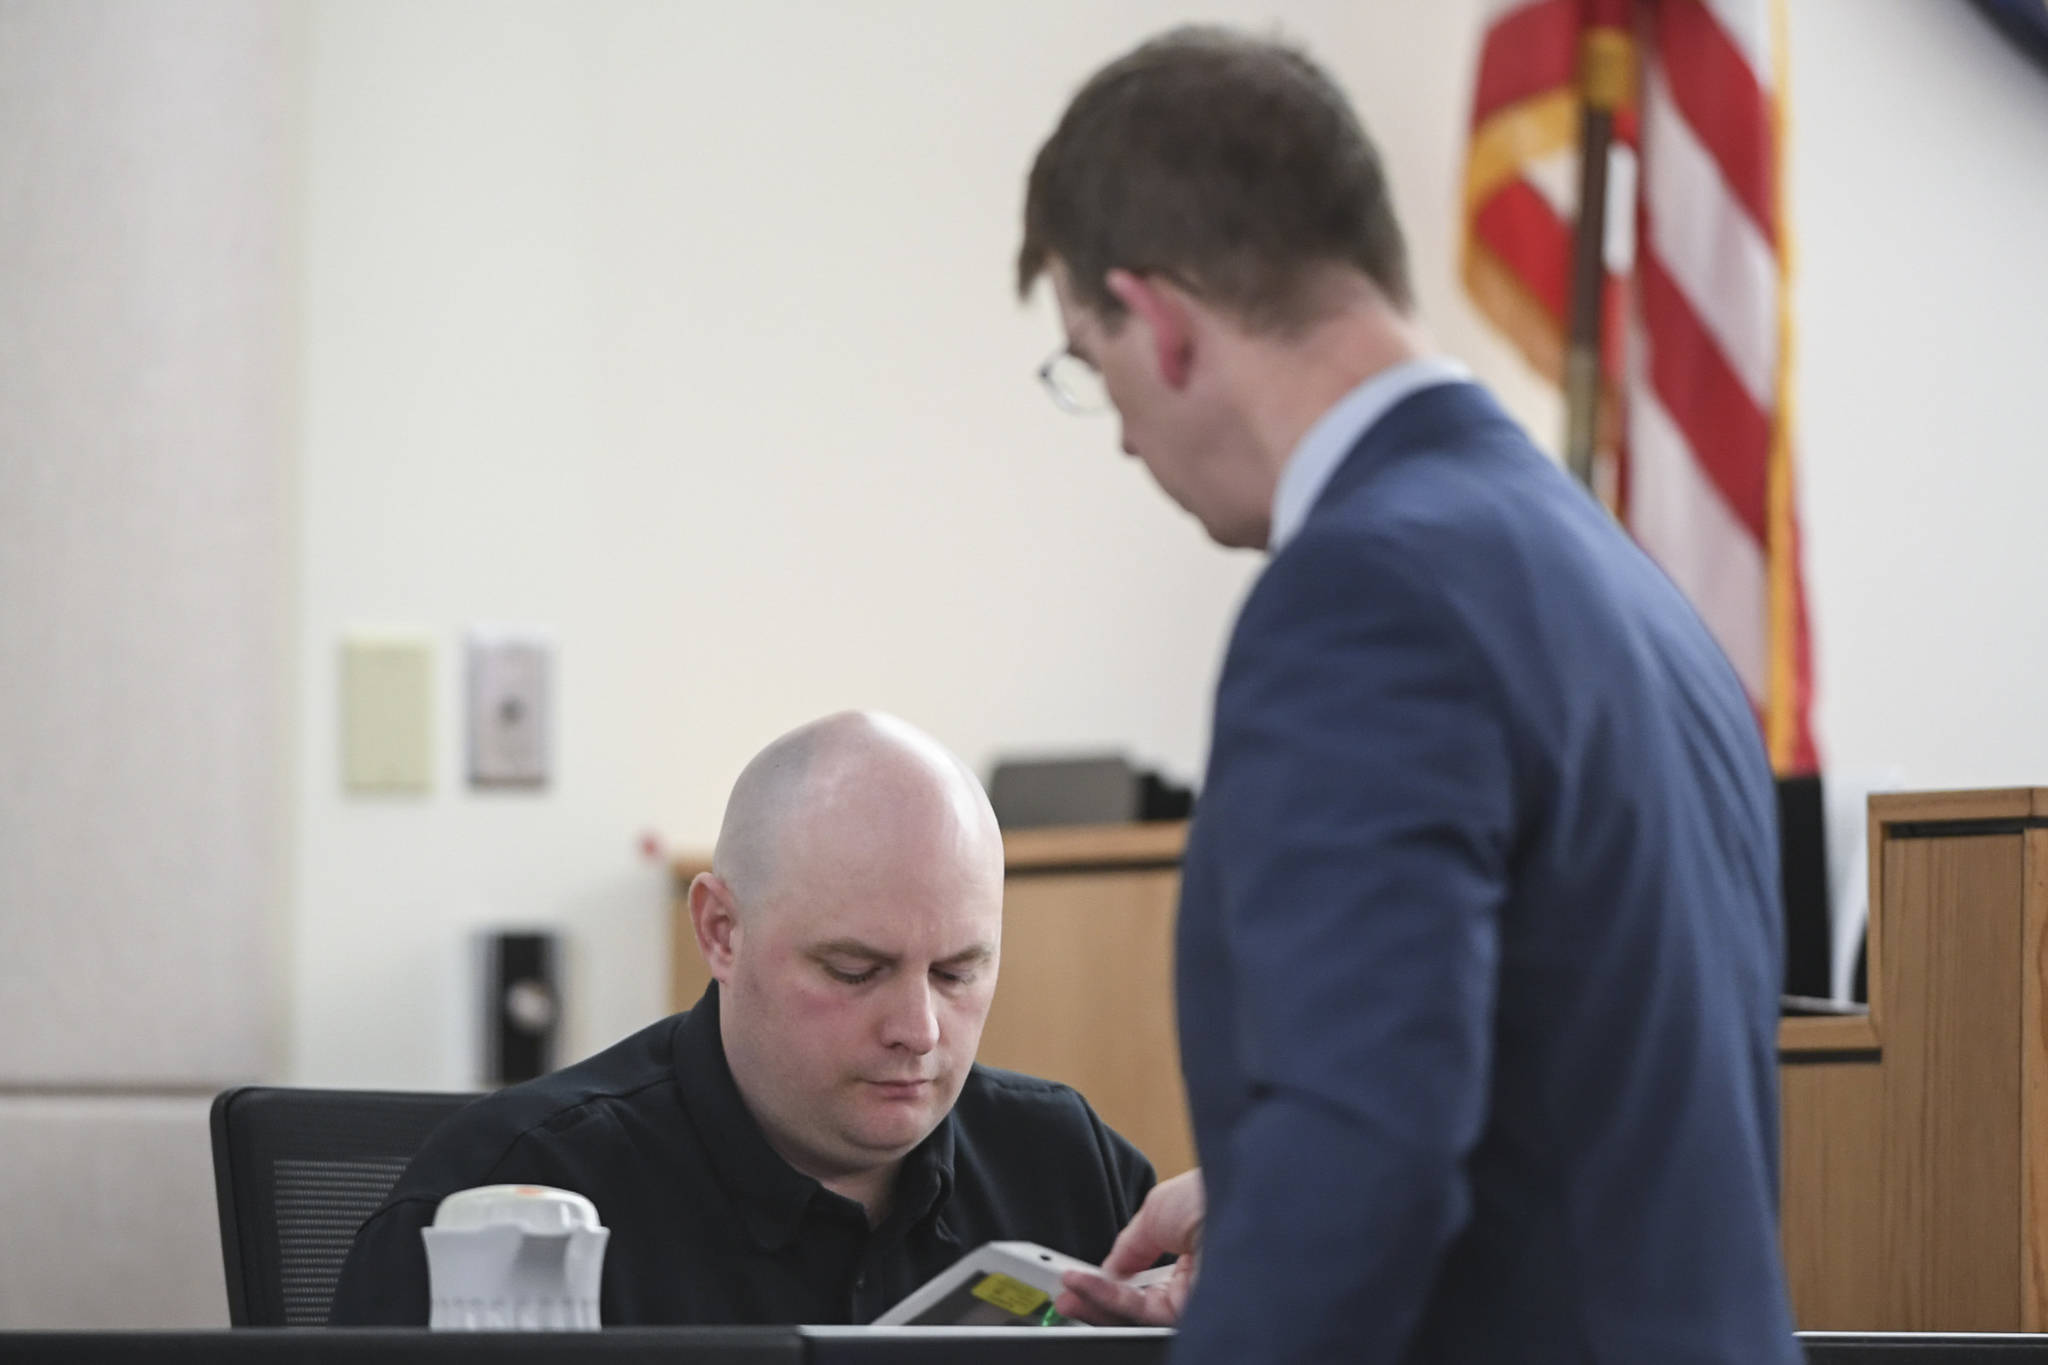 Prosecuting Attorney John Darnall, from the Office of Special Prosecutions, right, shows pictures of recovered bullets and their casings to Juneau Police Department Sgt. Matt DuBois during the double murder trial of Laron Carlton Graham in Juneau Superior Court on Monday, Sept. 30, 2019. Graham is charged with two counts of first-degree murder for the November 2015 shooting deaths of 36-year-old Robert H. Meireis and 34-year-old Elizabeth K. Tonsmeire. (Michael Penn | Juneau Empire)